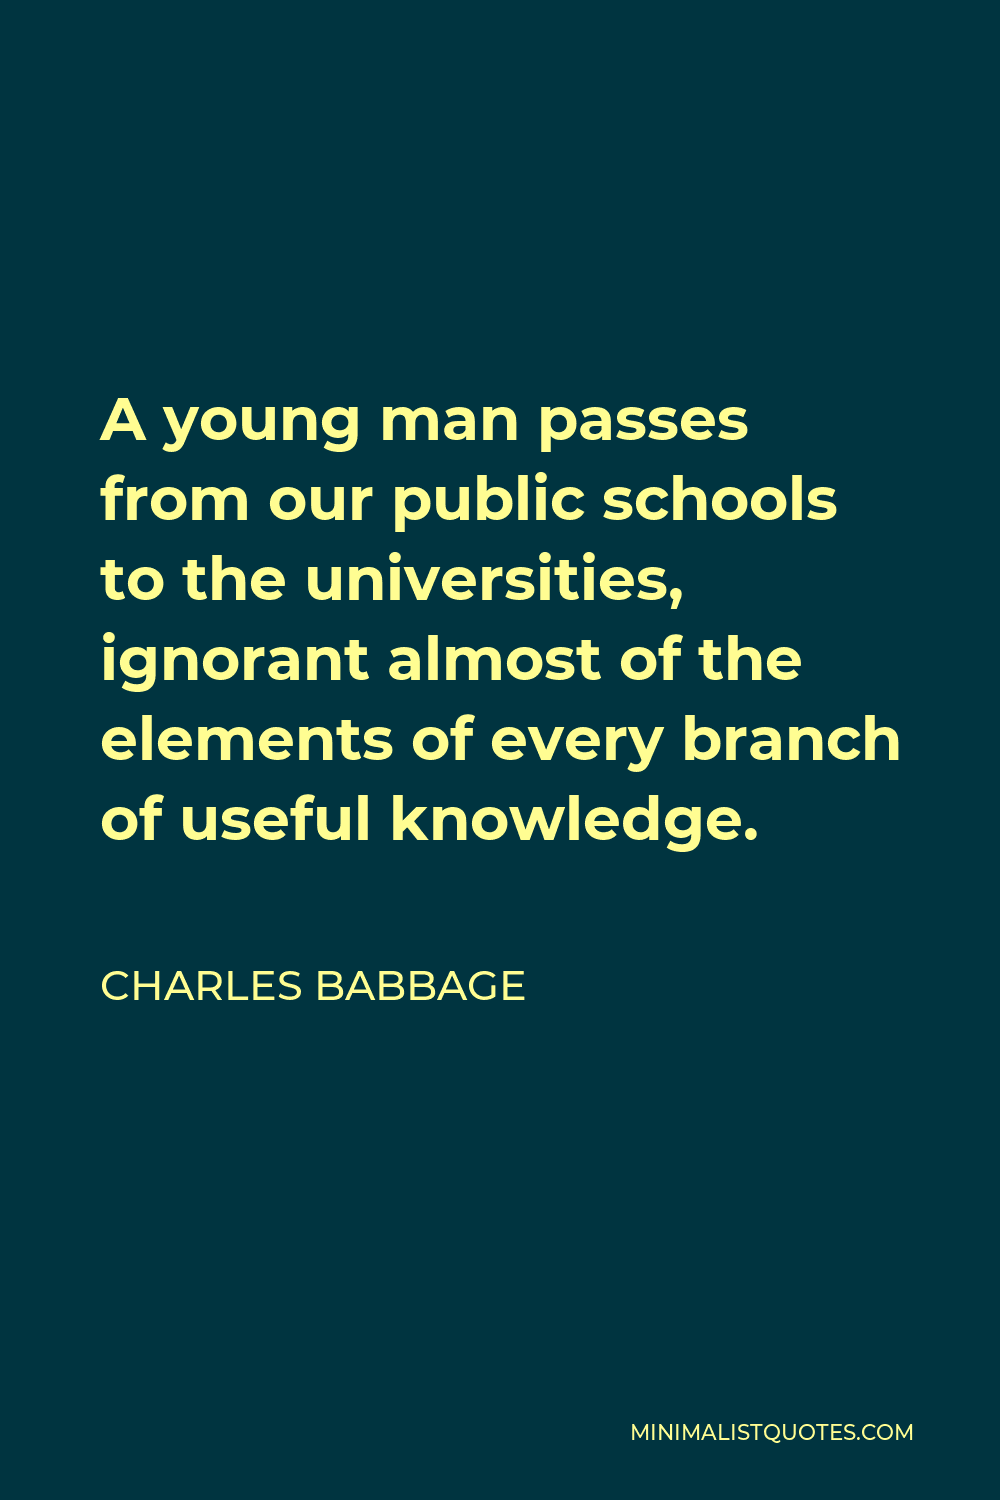 Charles Babbage Quote - A young man passes from our public schools to the universities, ignorant almost of the elements of every branch of useful knowledge.